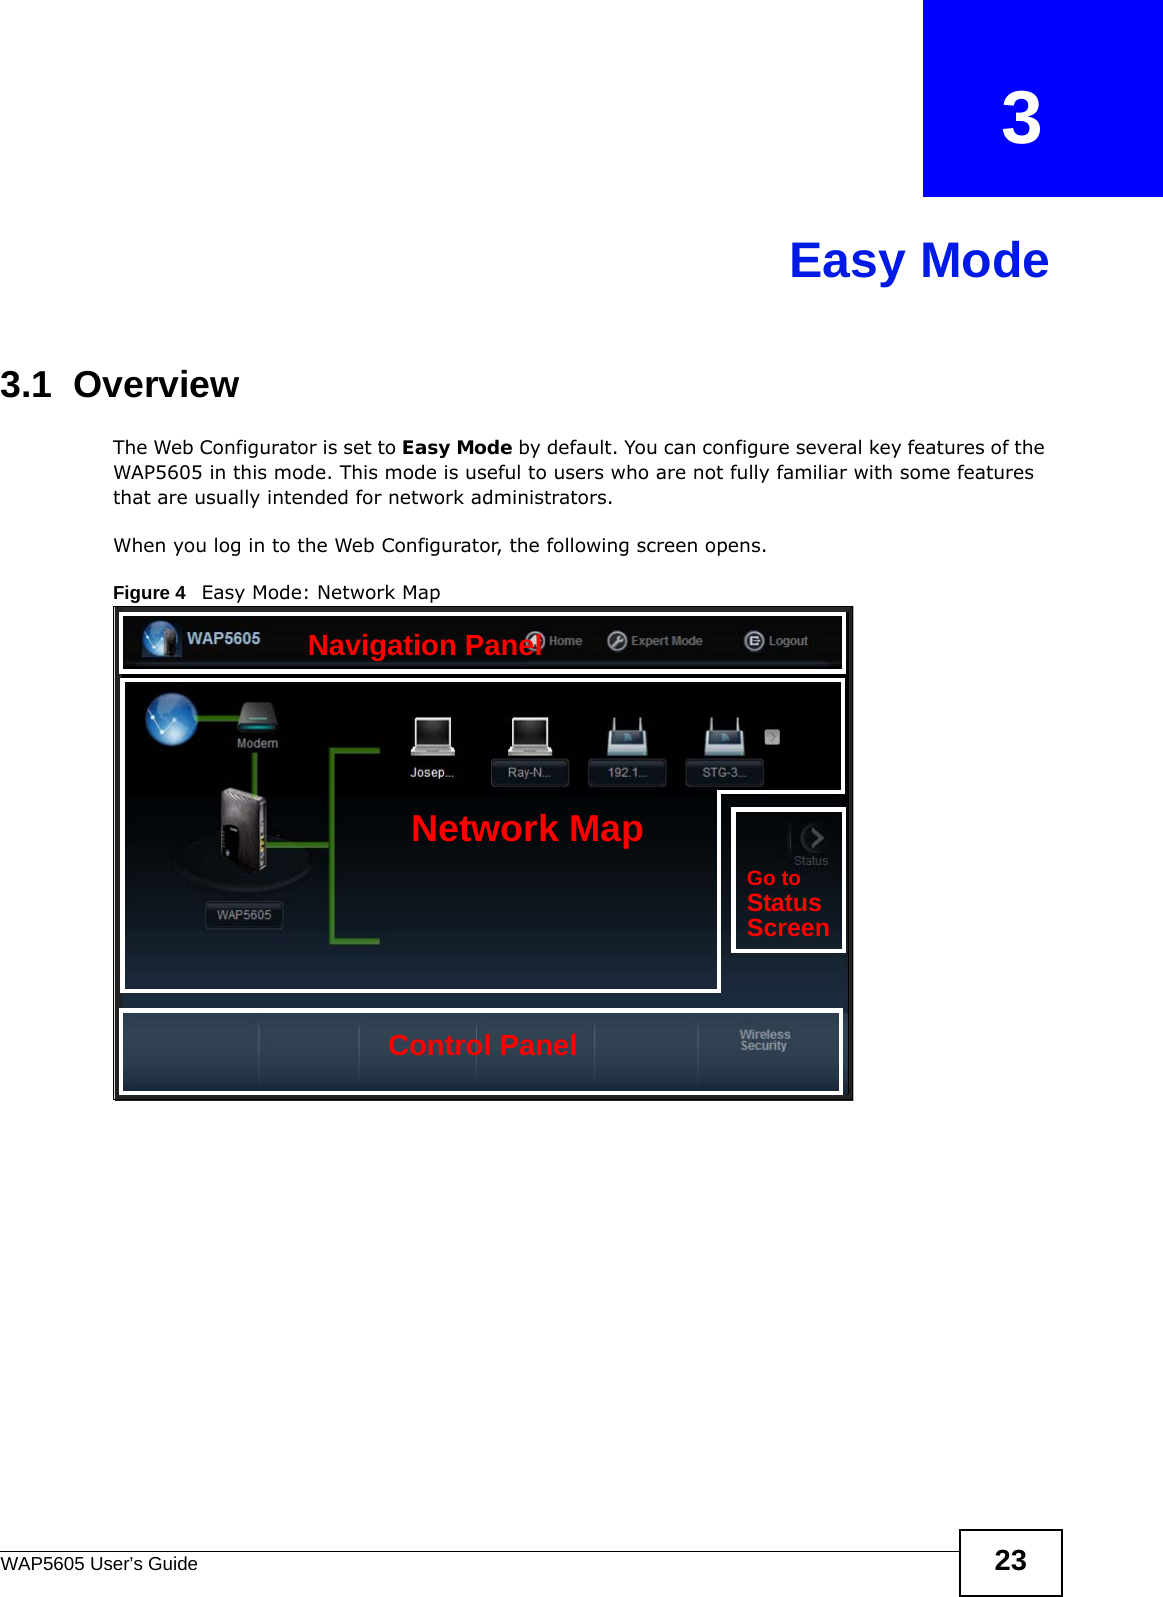 WAP5605 User’s Guide 23CHAPTER   3Easy Mode3.1  OverviewThe Web Configurator is set to Easy Mode by default. You can configure several key features of the WAP5605 in this mode. This mode is useful to users who are not fully familiar with some features that are usually intended for network administrators.When you log in to the Web Configurator, the following screen opens.Figure 4   Easy Mode: Network Map Network MapControl PanelGo toStatusScreenNavigation Panel